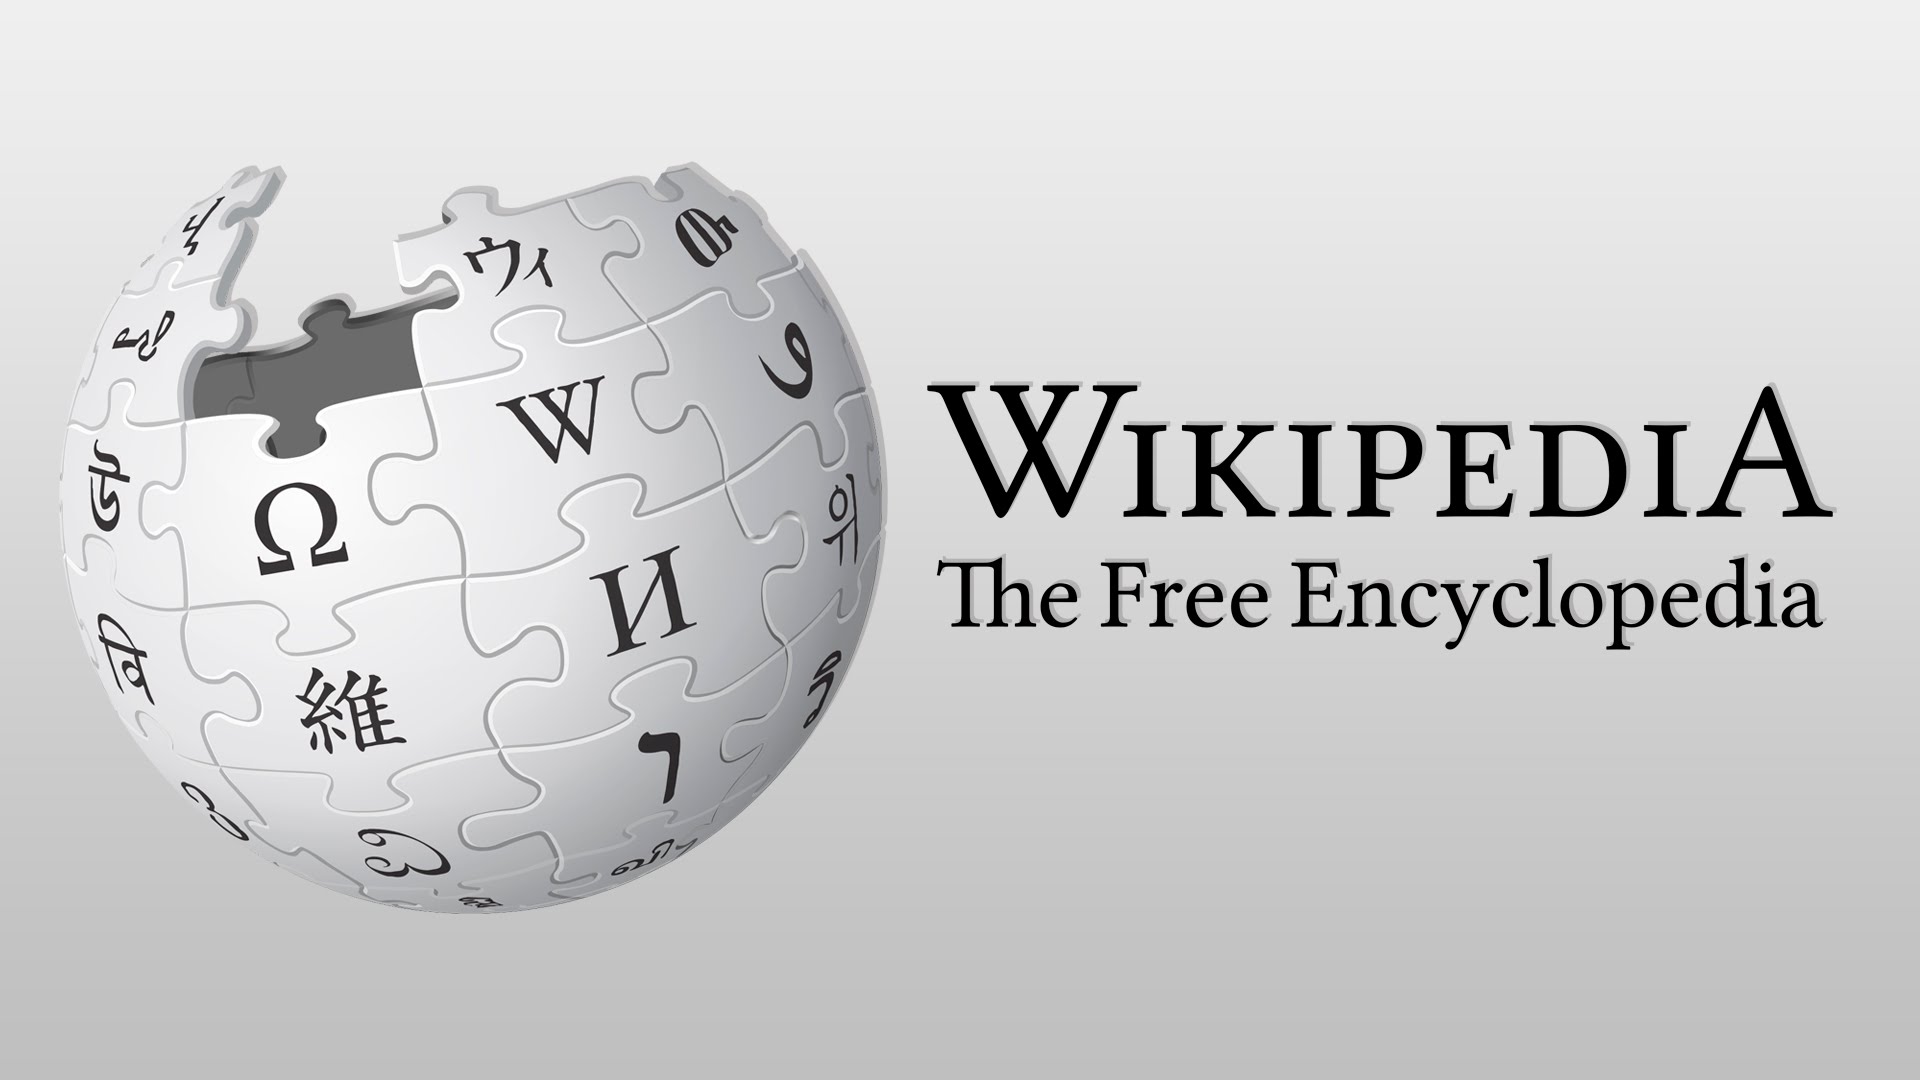 The official Wikipedia logo with some text written beside it